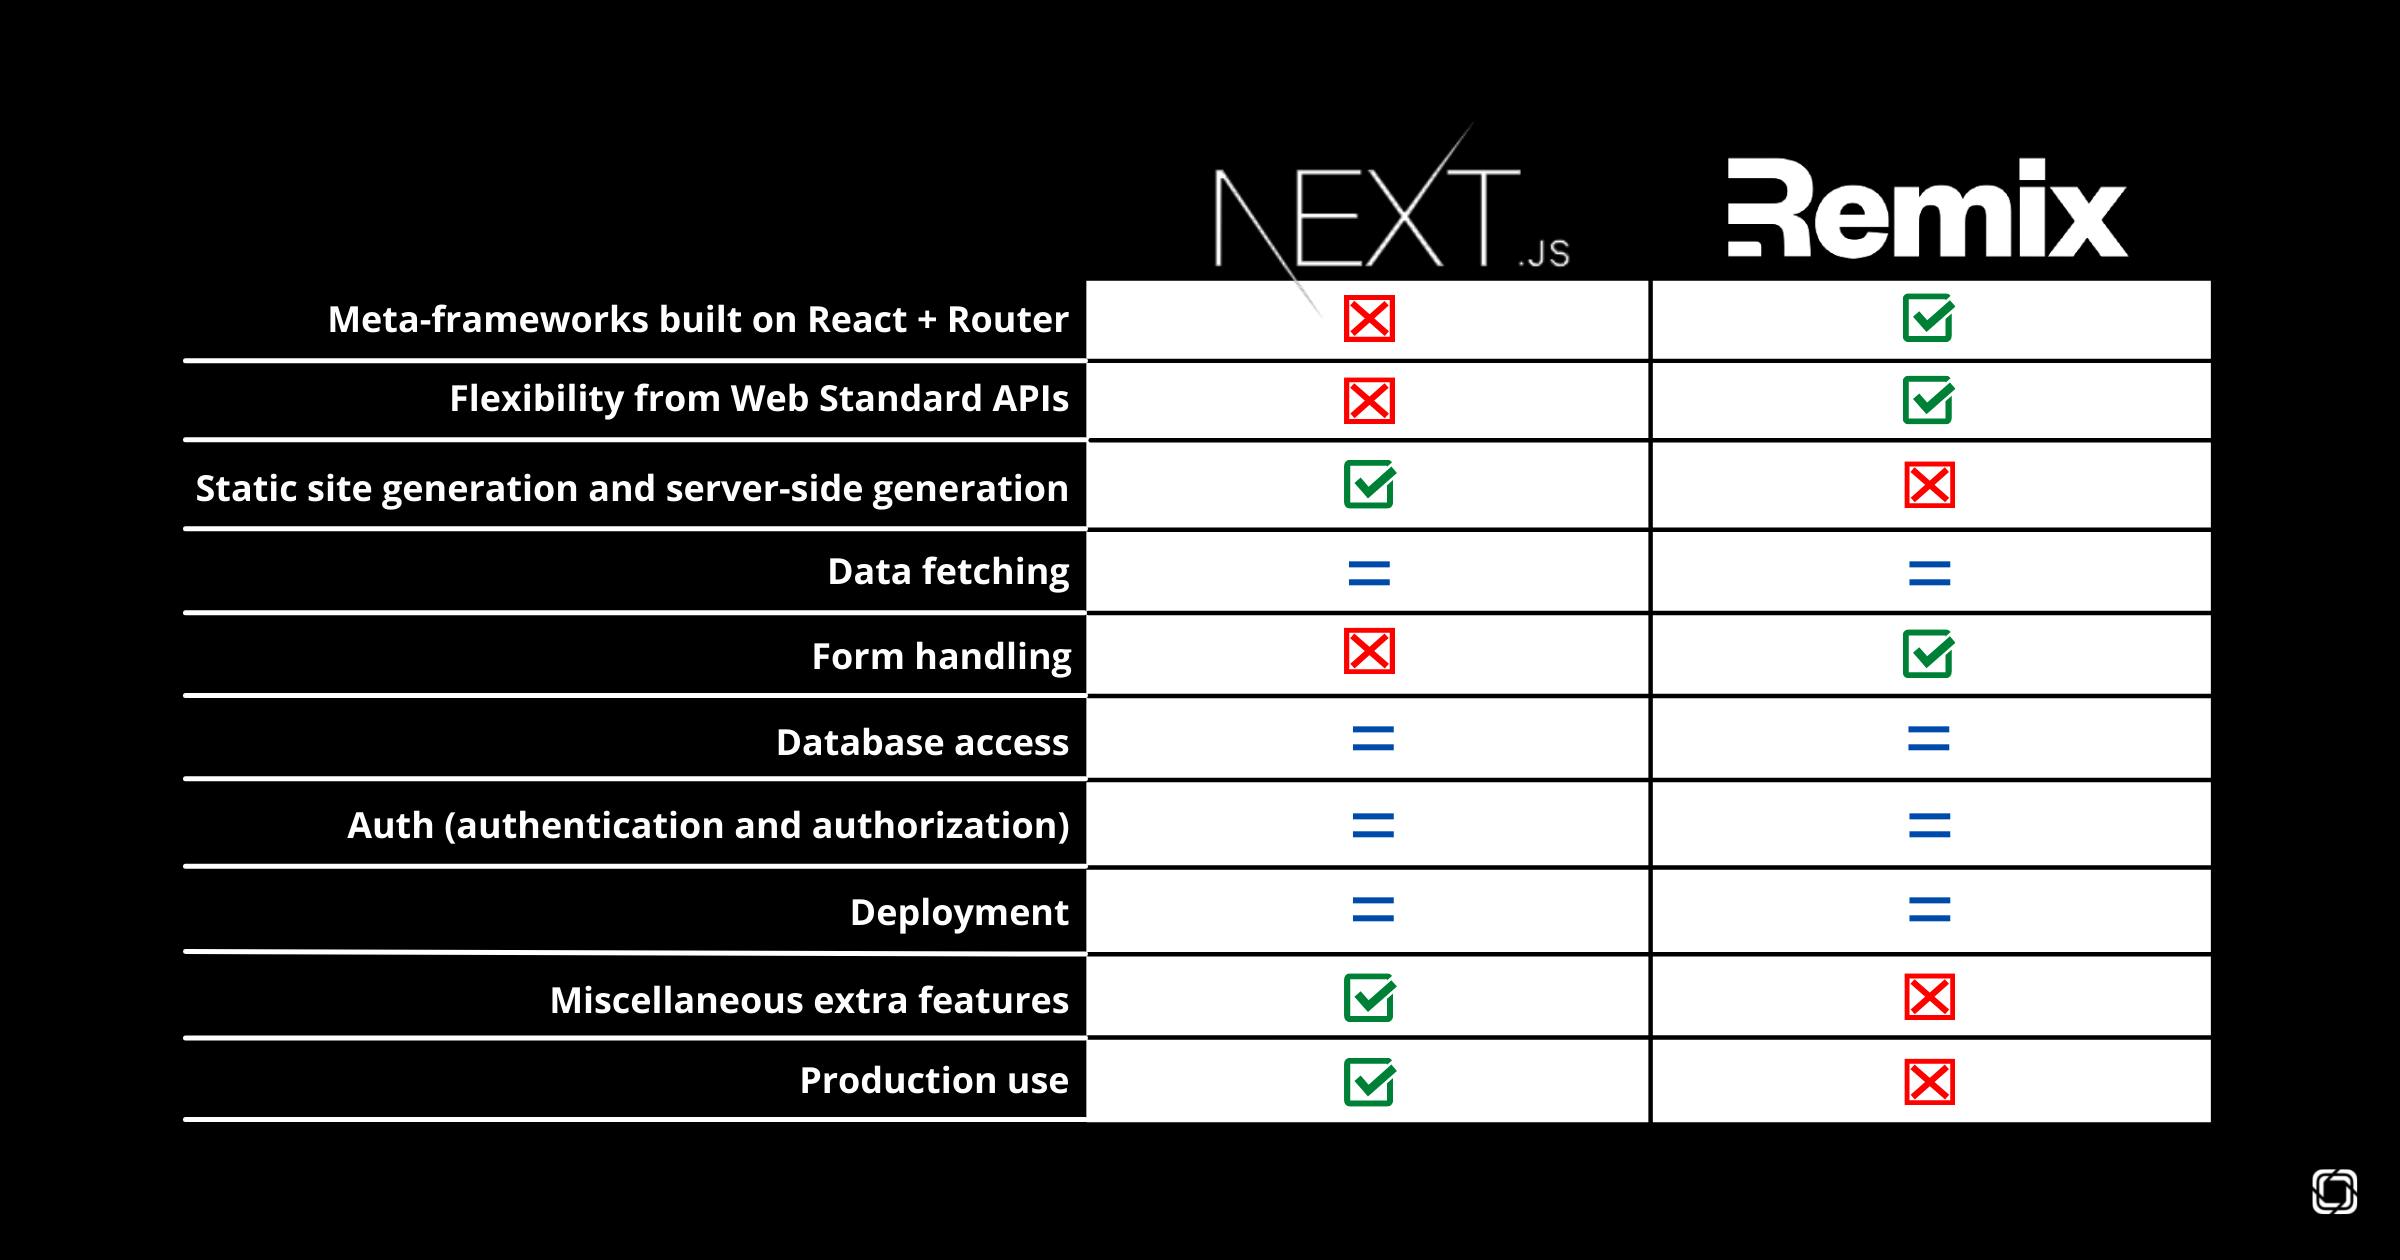 A table comparing Next and Remix. For "Meta-frameworks built on React + Router": Next is an X and Remix is a check. For "Flexibility from Web Standard APIs": Next is an X and Remix is a check. For "Static site generation and server-side generation": Next is a check and Remix is an X. For "Data Fetching" the two are equal. For "Form handling": Next is an X and Remix is a check. For "Database access" they're equal. For "Auth (authentication and authorization)" they're equal. For "Deployment" they're equal. For "Miscellaneous extra features": Next is a check and Remix is an X. For "Production use": Next is a check and Remix is an X.